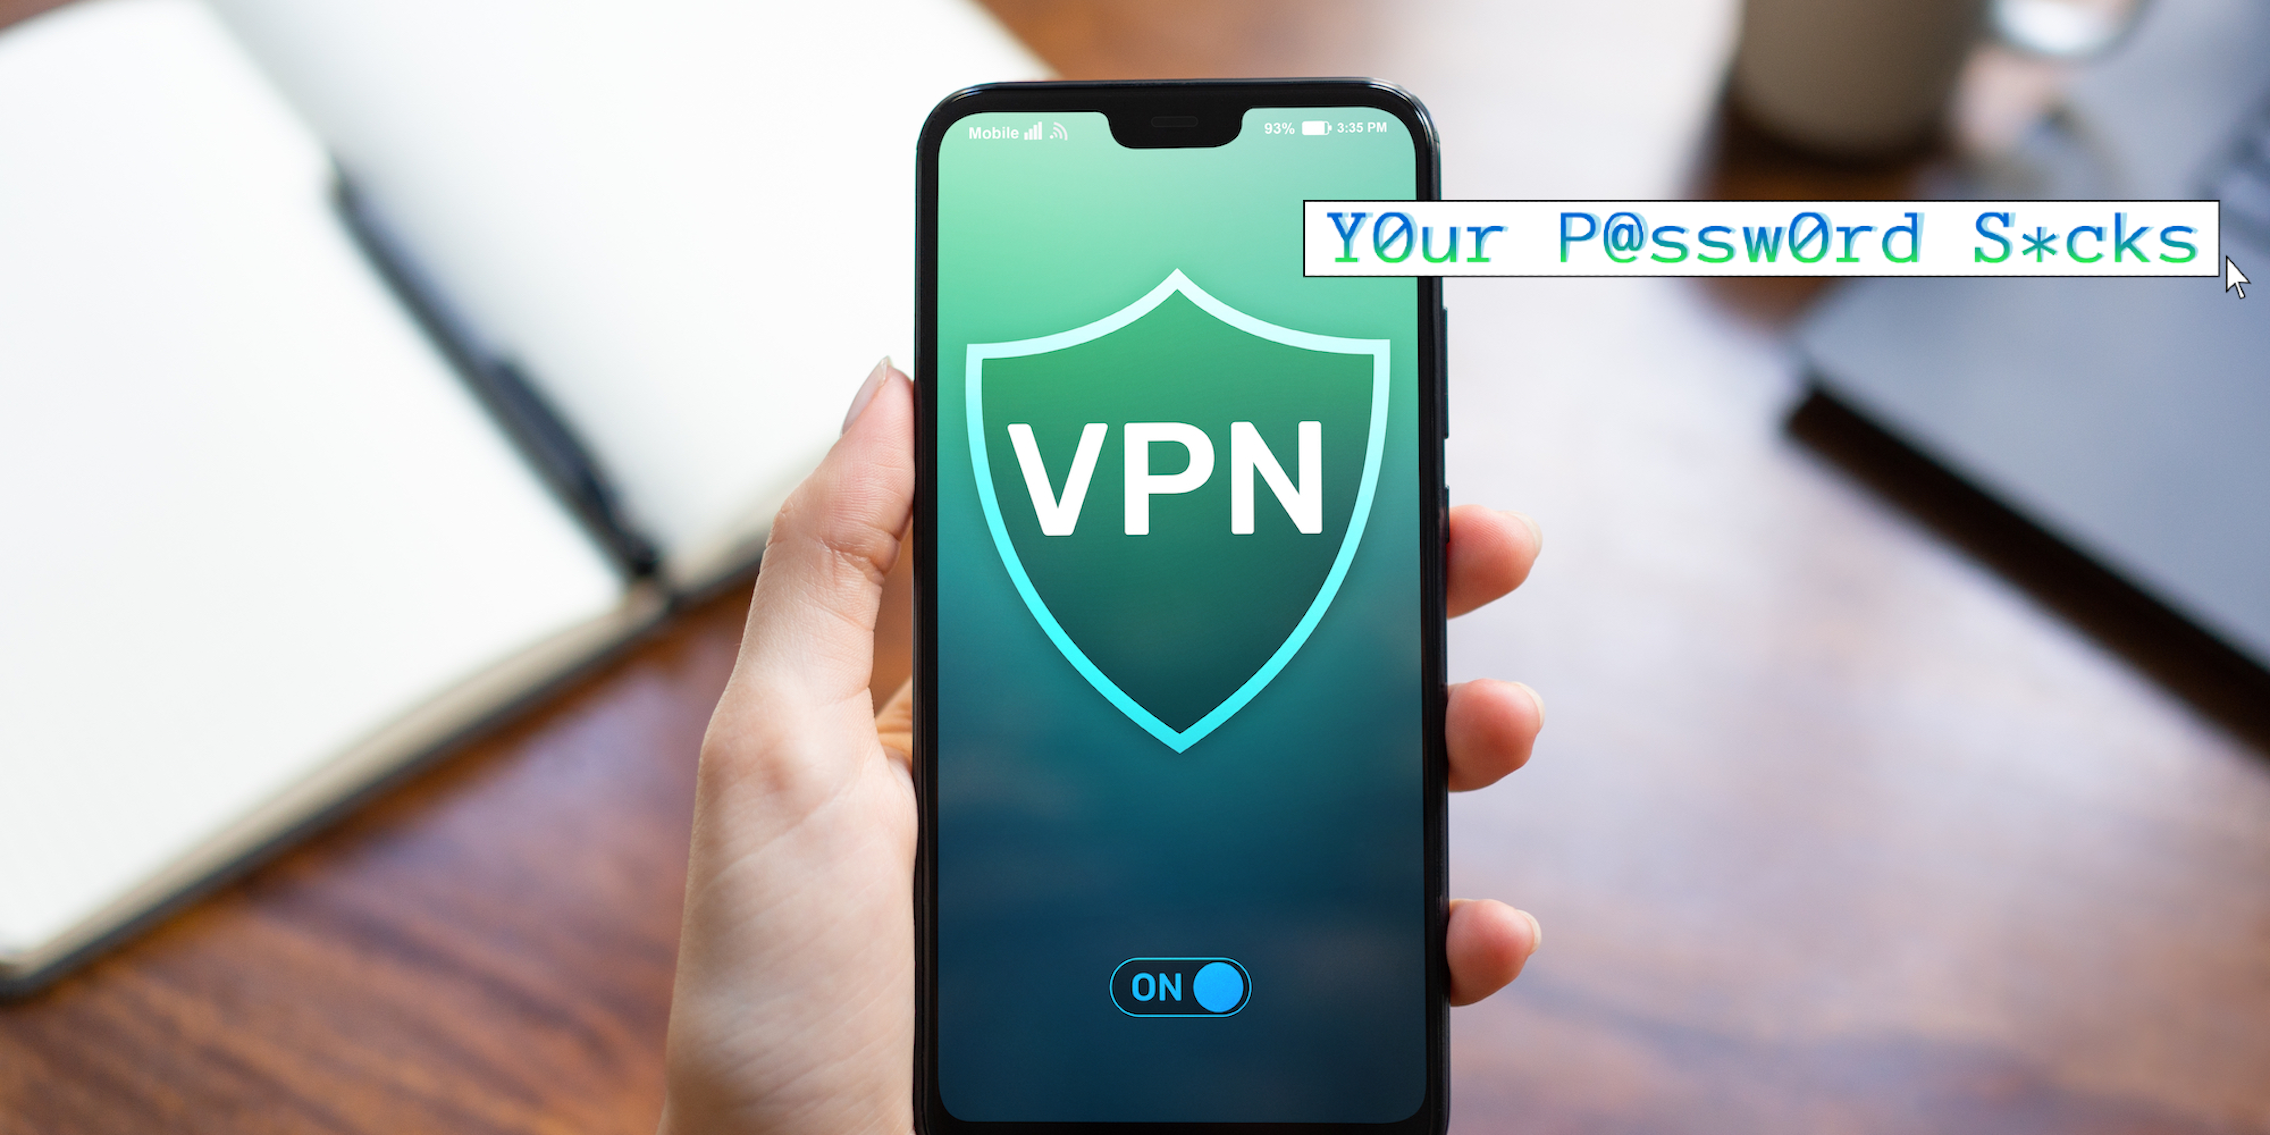 a person holding a phone connecting to a vpn service